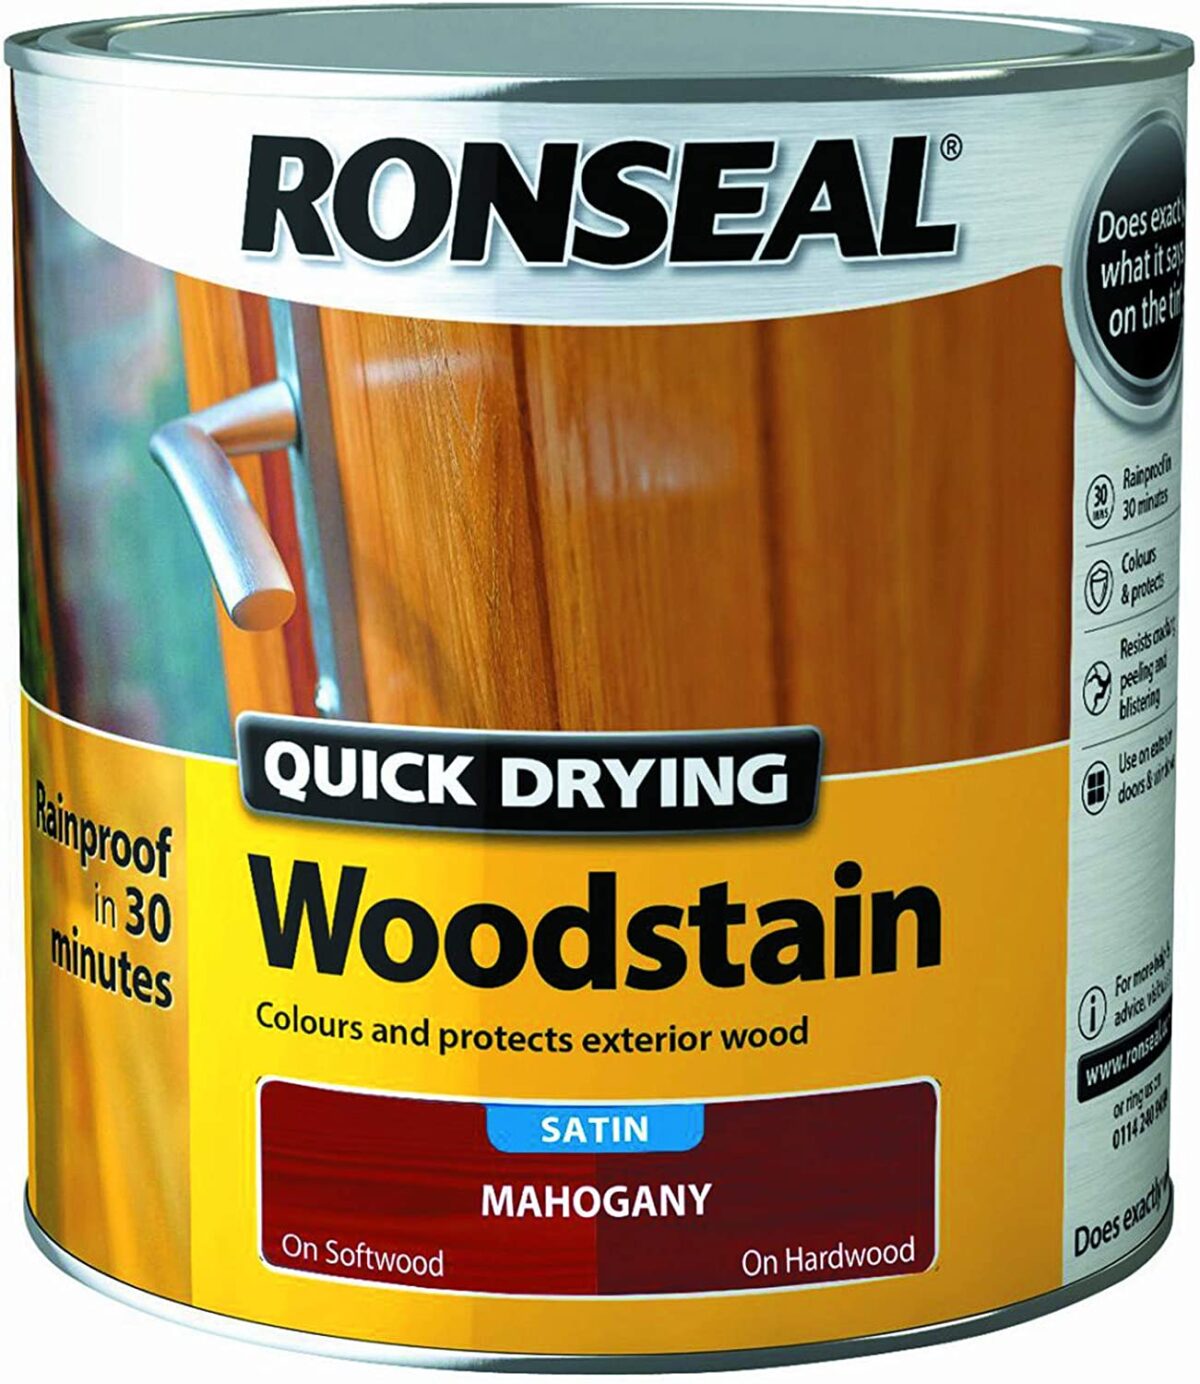 Britain, suffering from a lack of Ronseal Quick Drying Woodstain